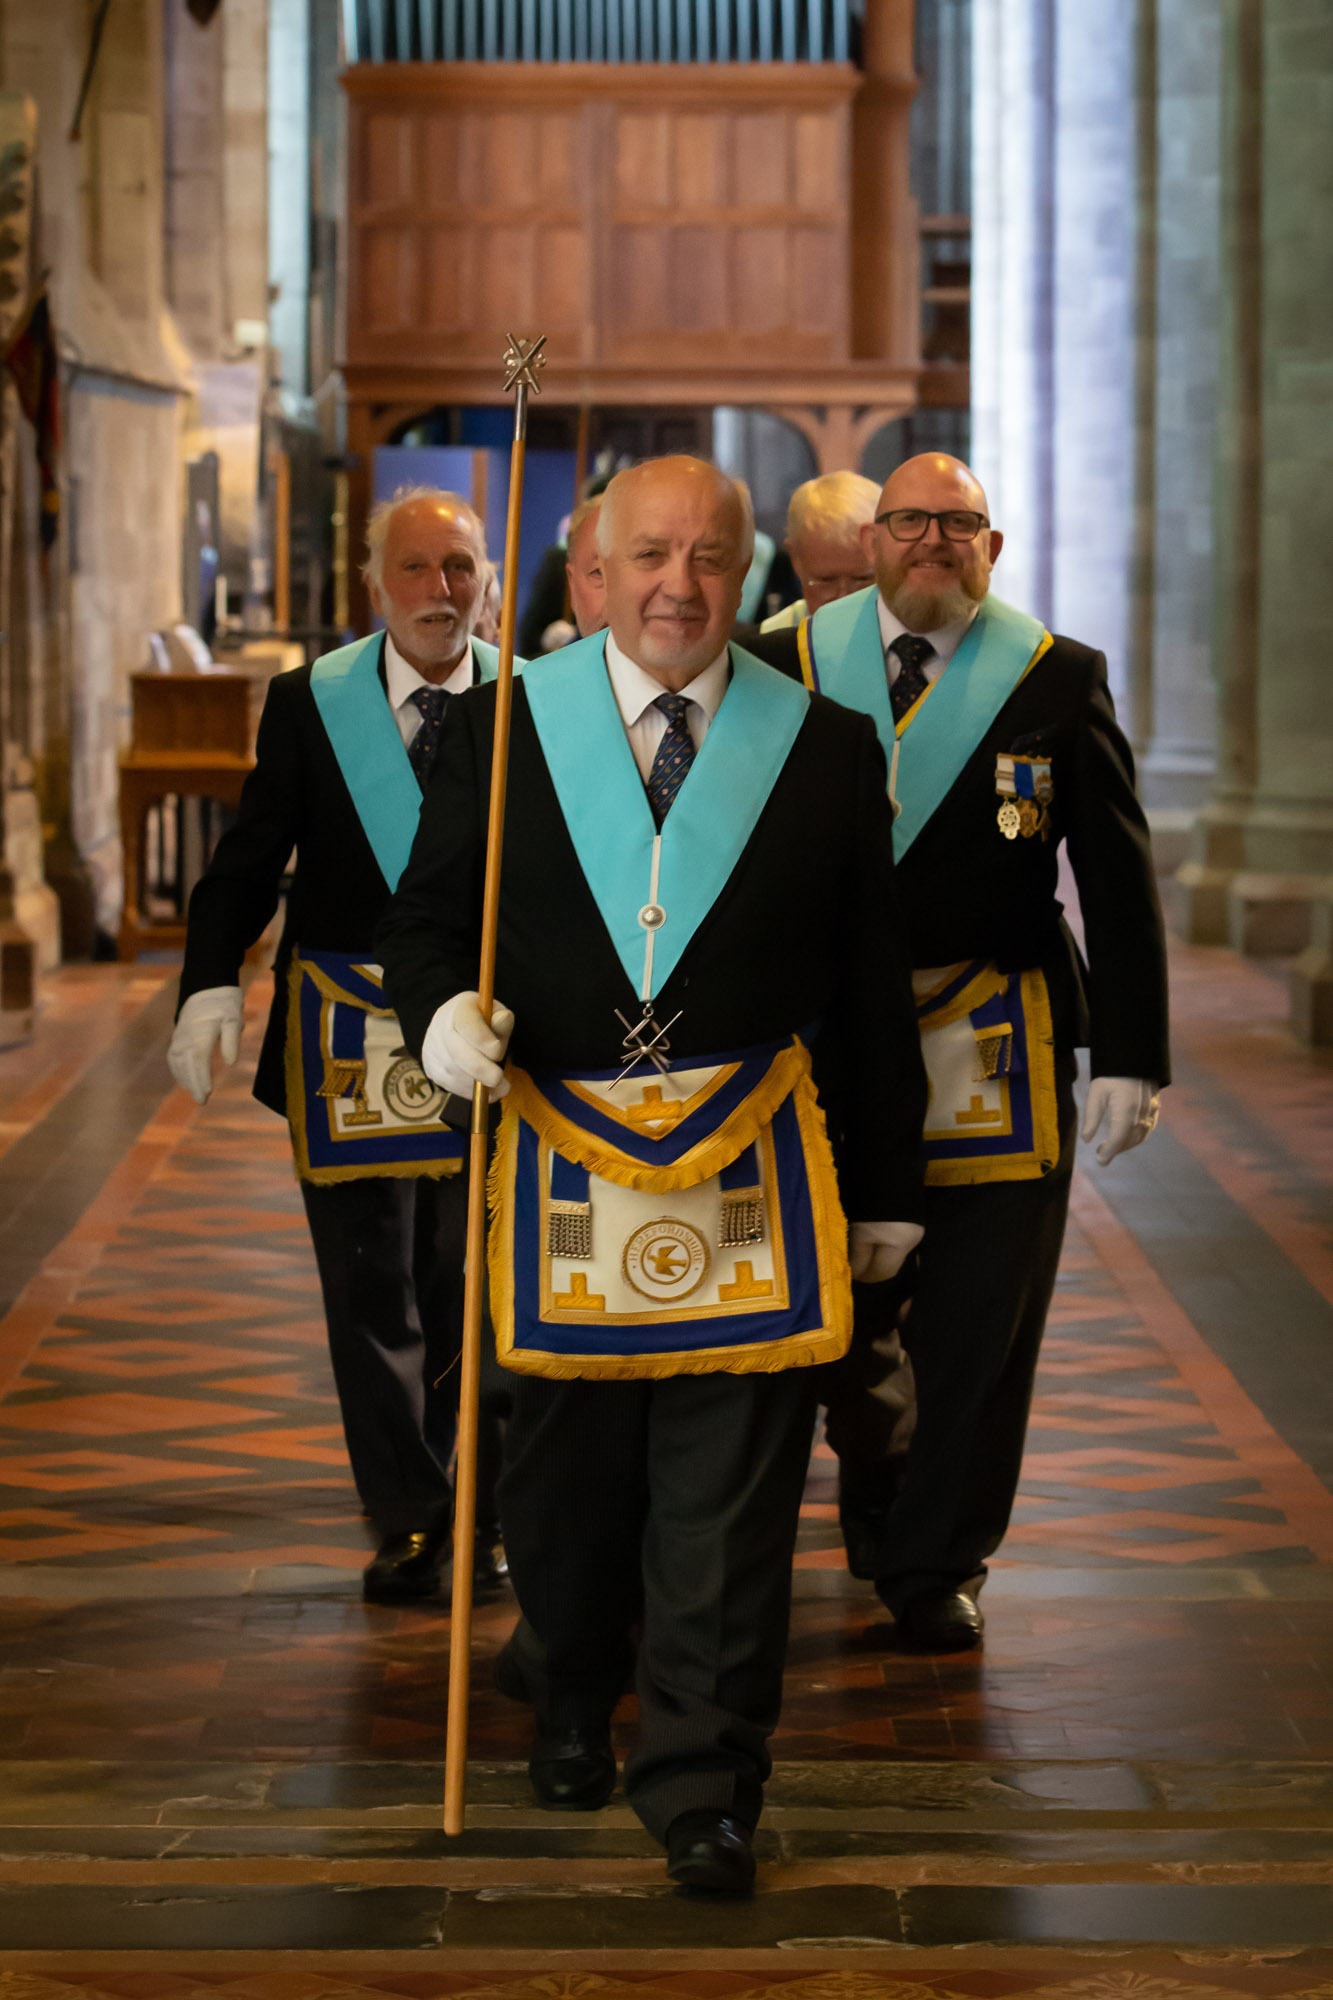 Photo in the Cathedral W Bro John Mayo-Evans leading Vaga Lodge in, flanked by W Bro Gordon Williams and W Bro Pete White.